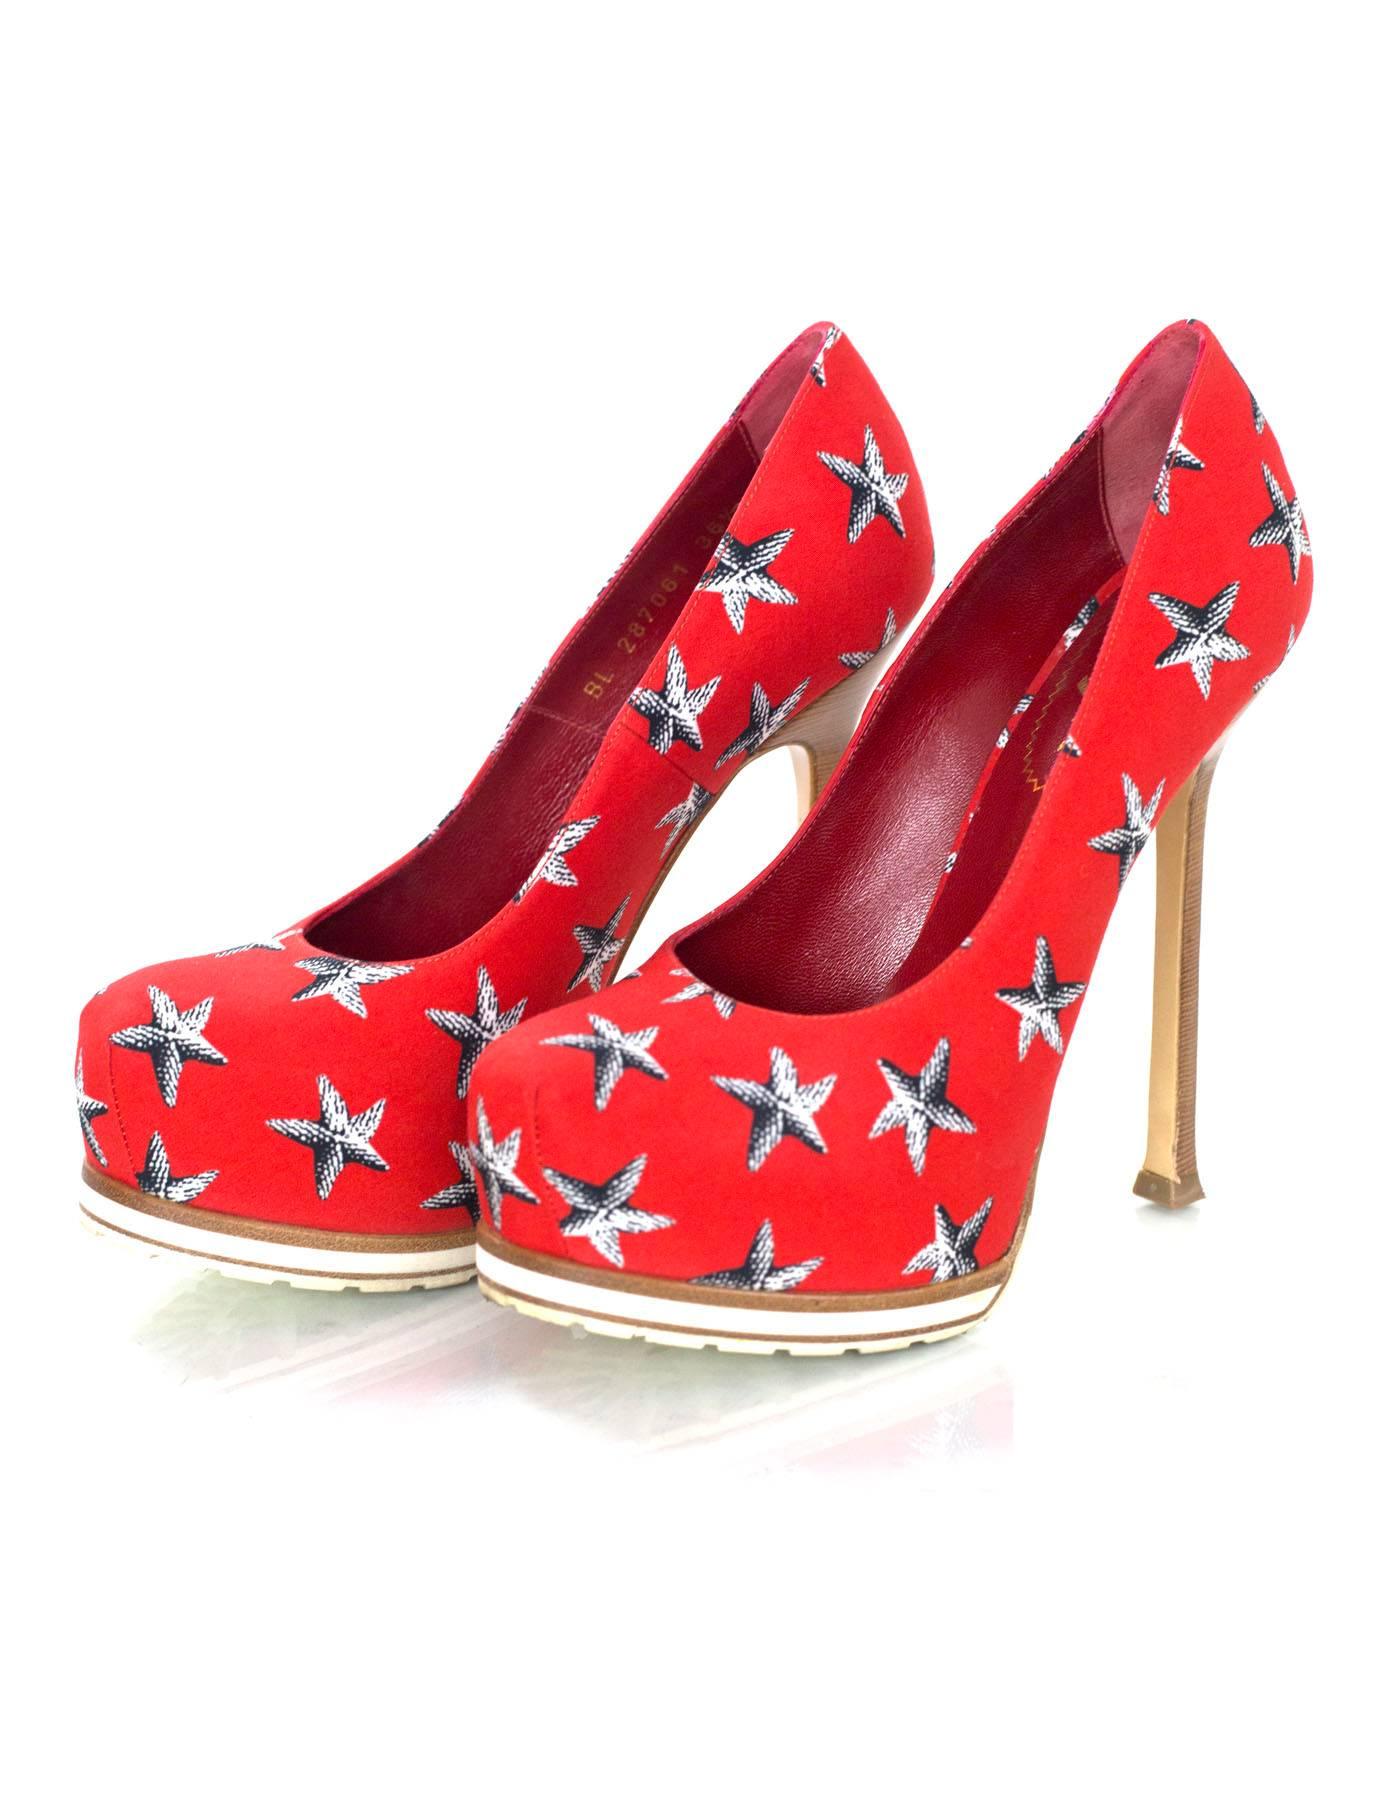 YSL Red Medium Starfish Tribtoo 105 Pumps Sz 36.5 rt. $895 In Excellent Condition In New York, NY